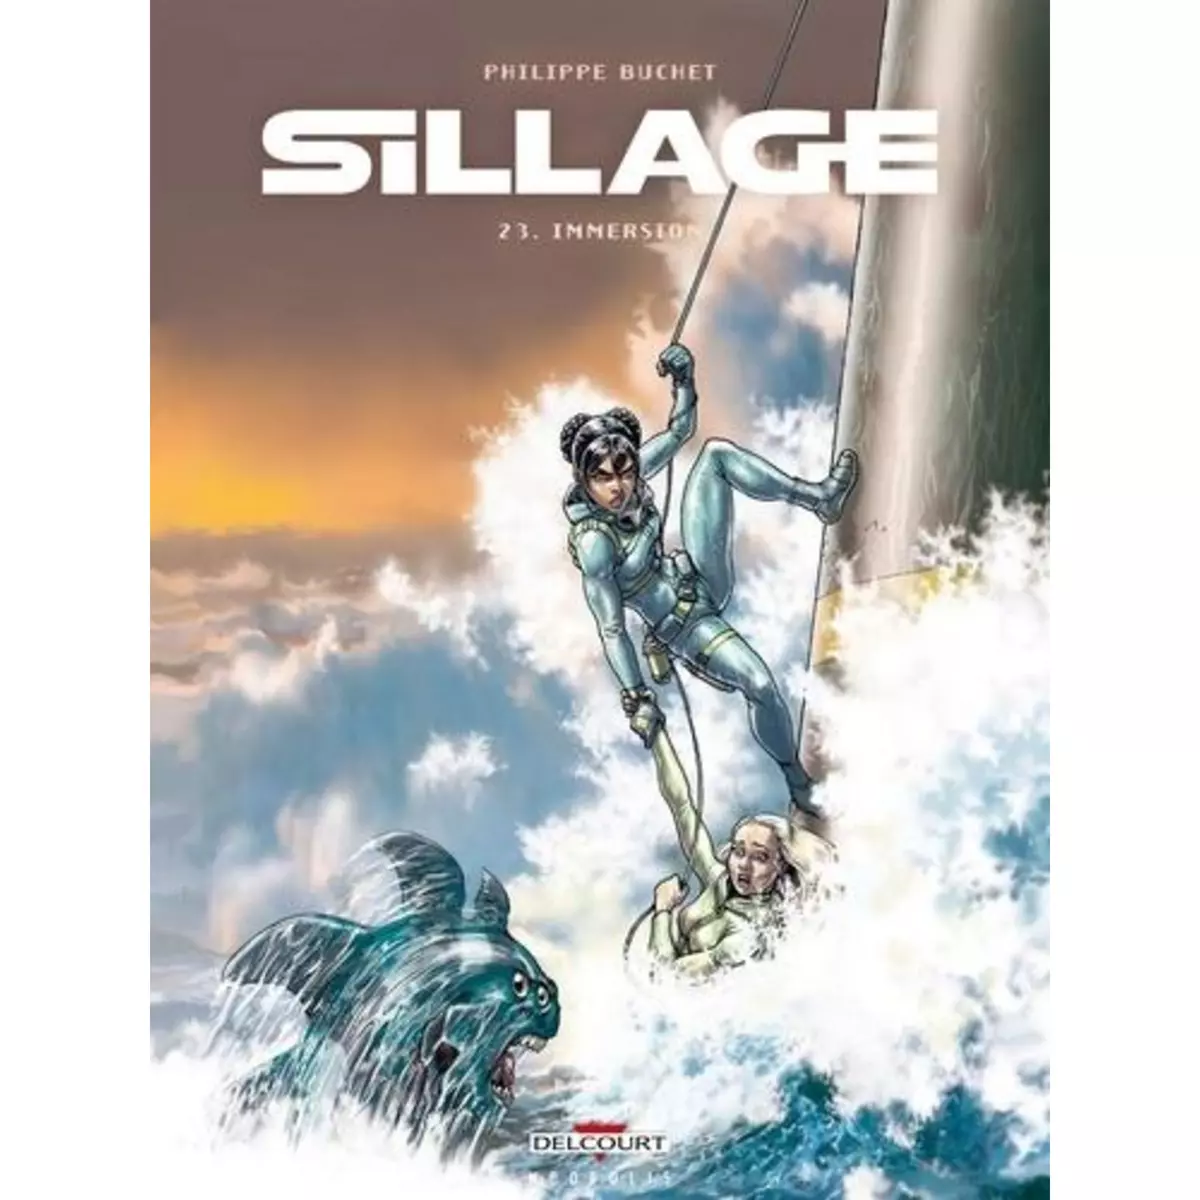  SILLAGE TOME 23 : IMMERSION, Buchet Philippe